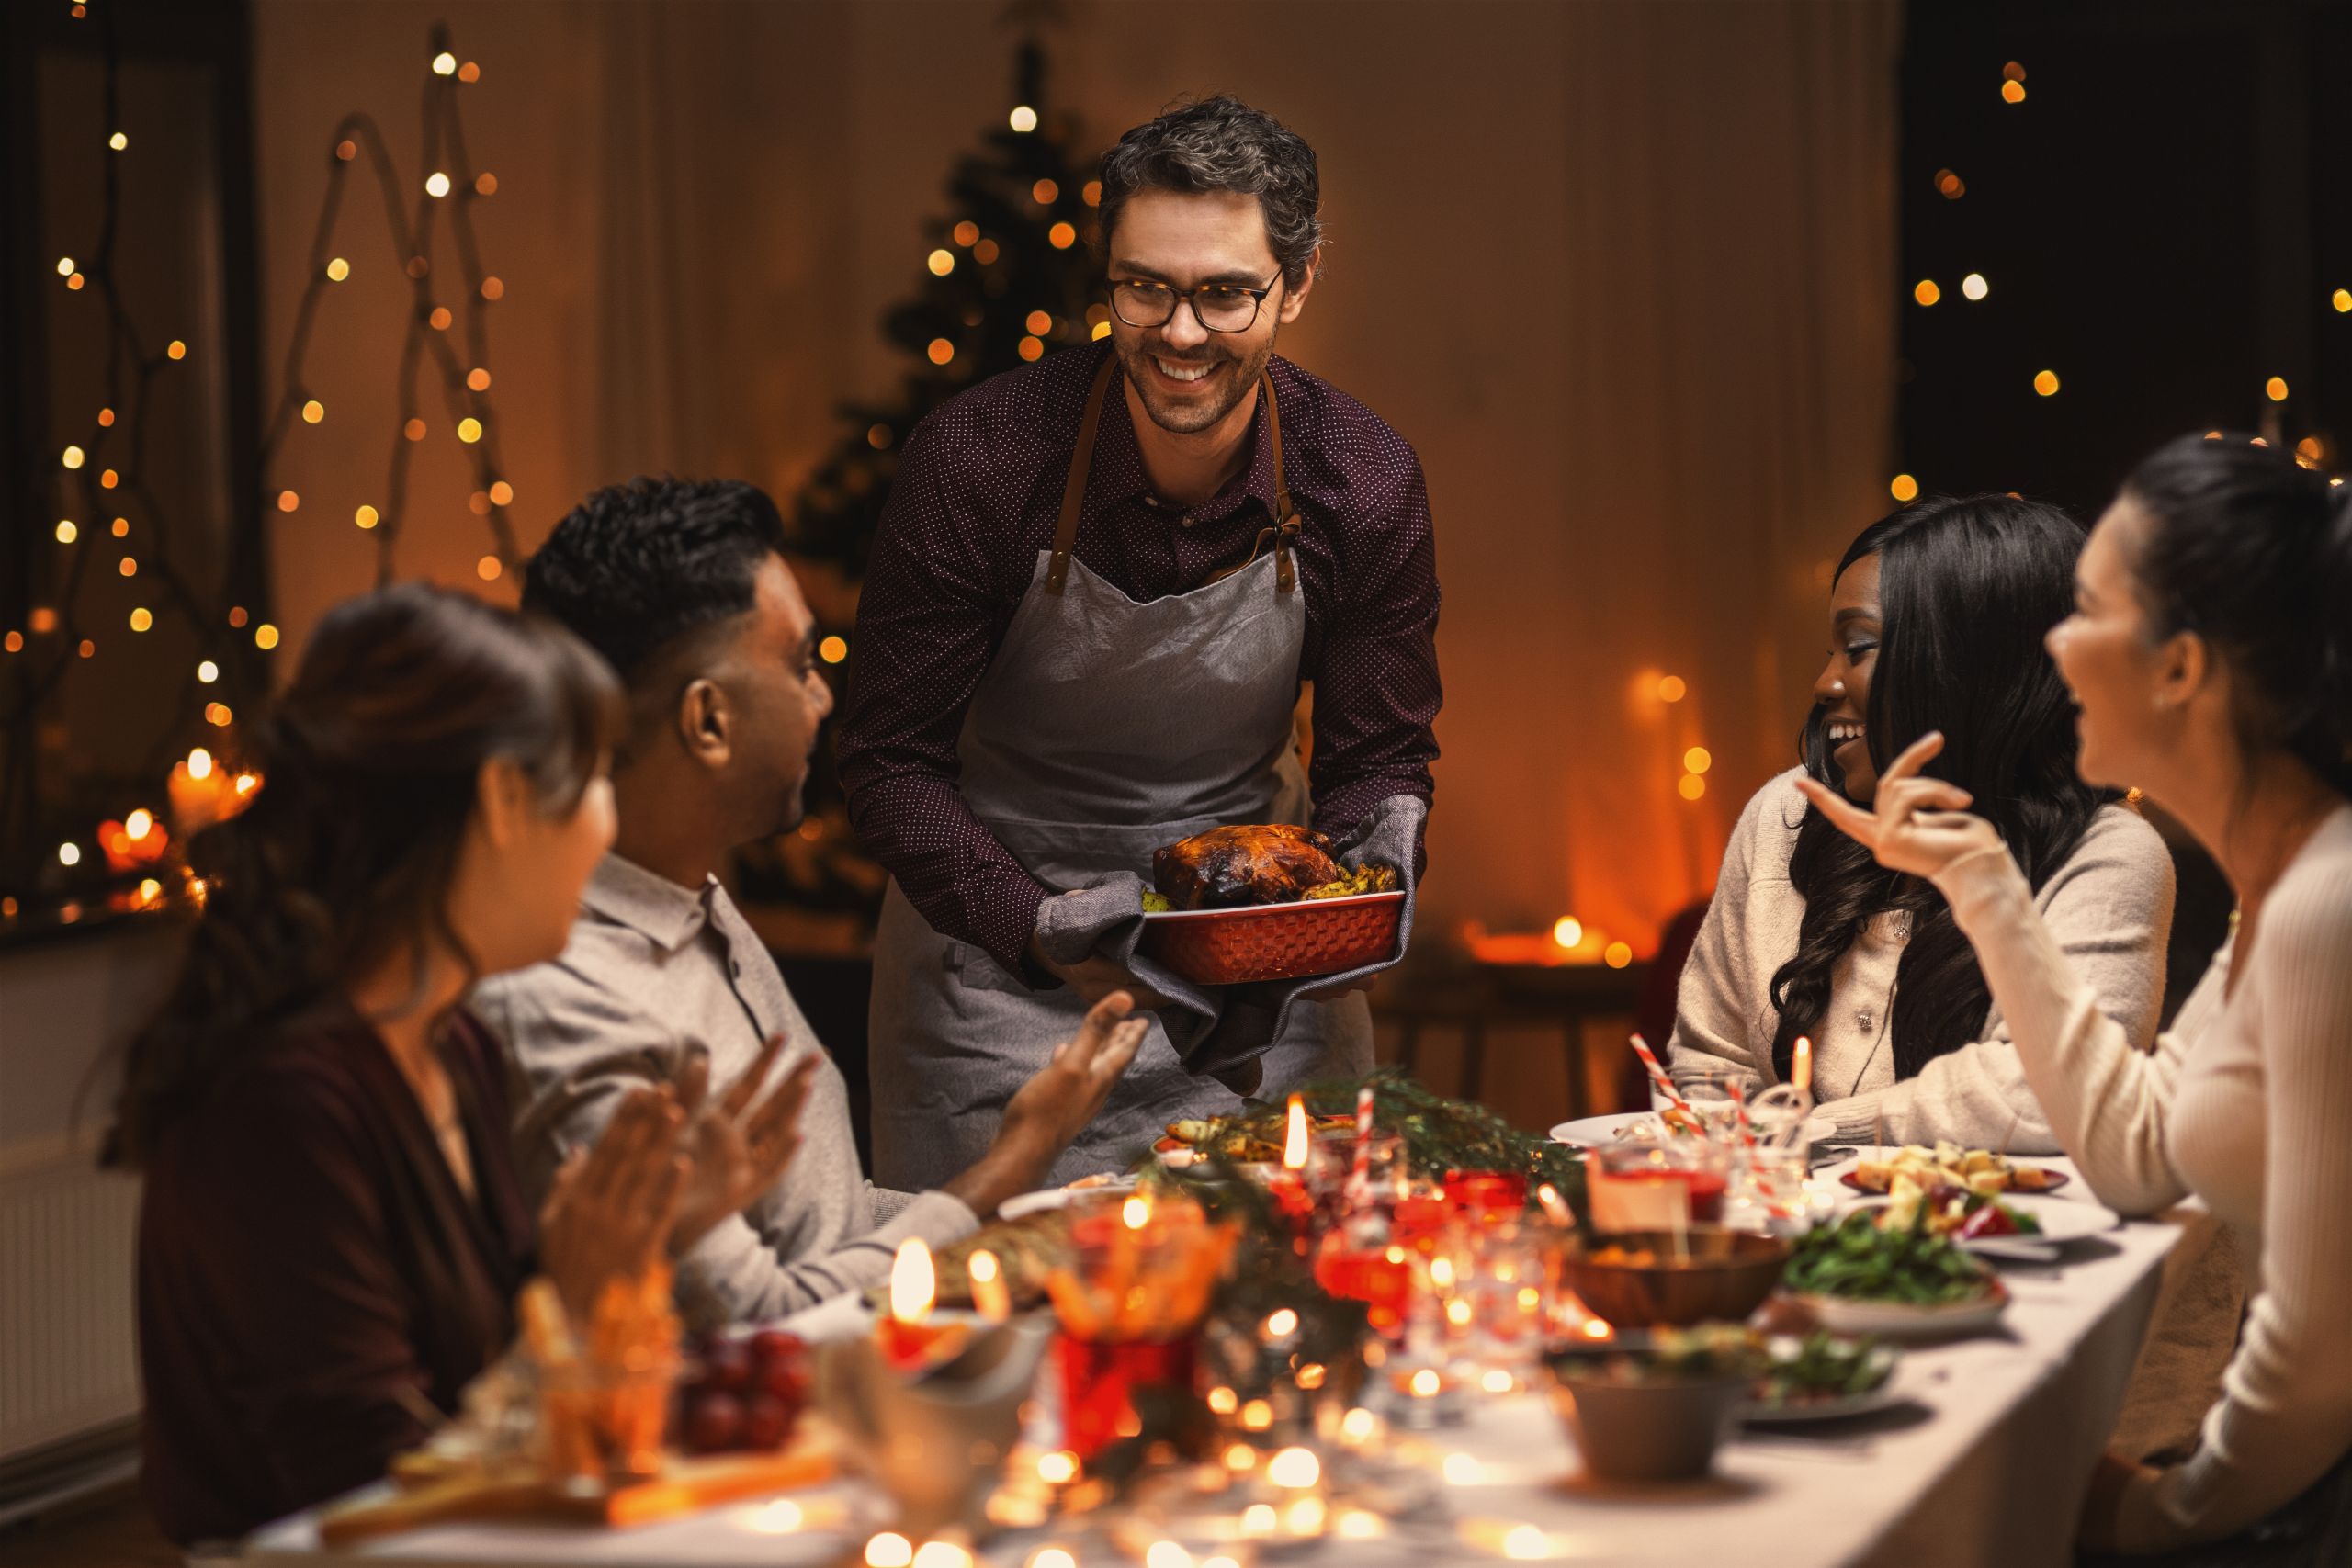 sober holiday season concept - family at dinner table